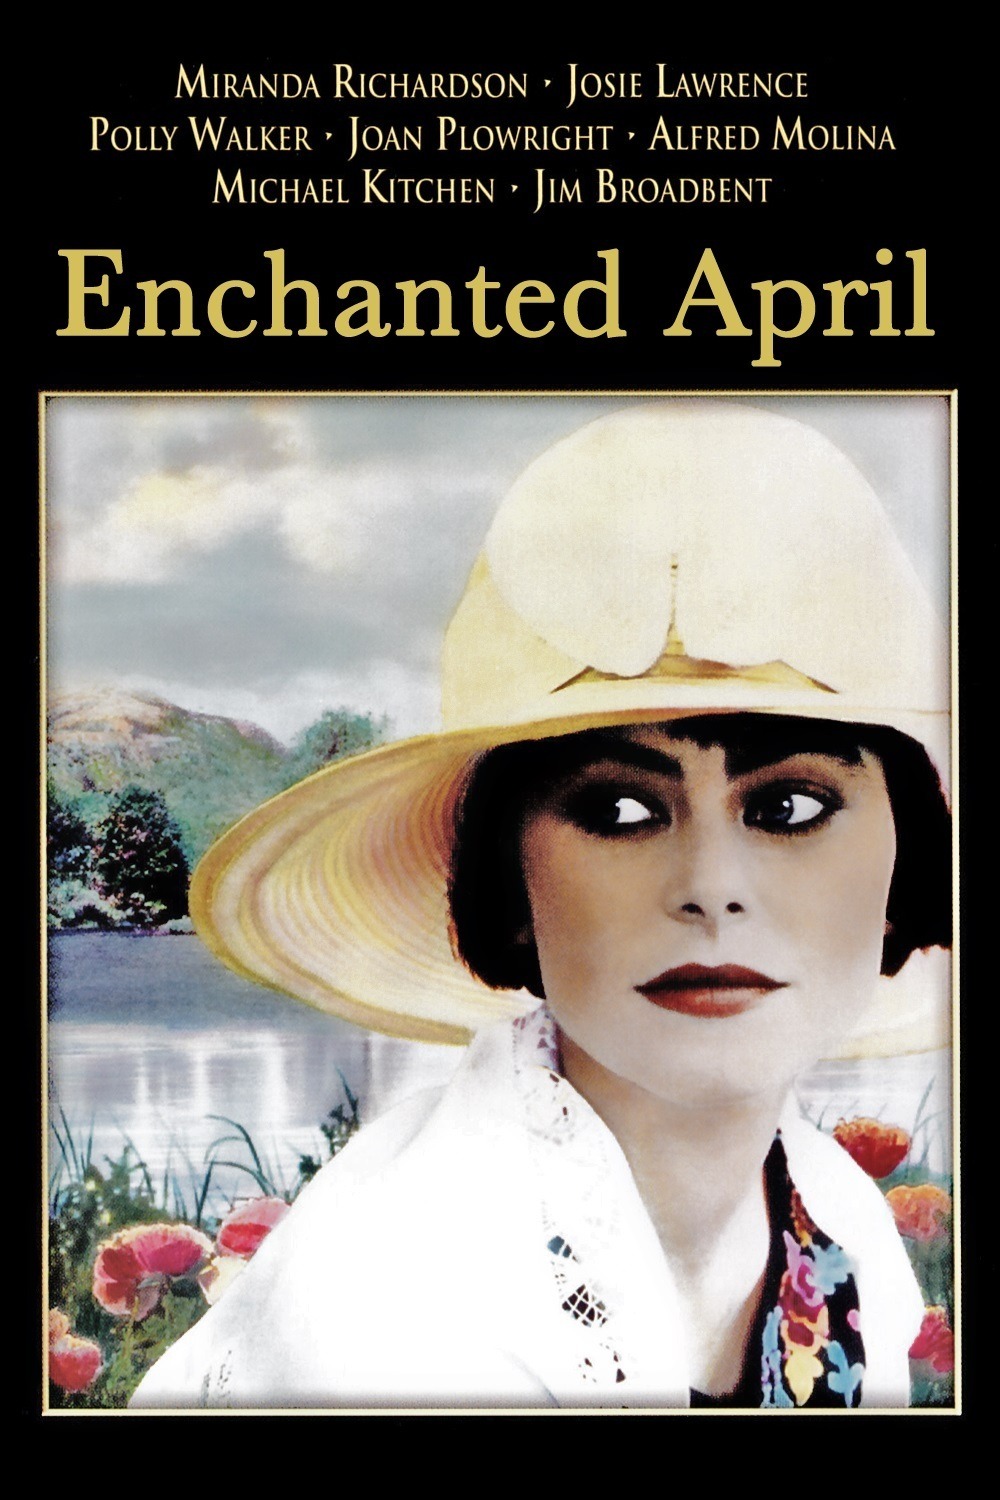 AbjectAdmirer â€” Enchanted April (1991): A film for MFMM lovers...